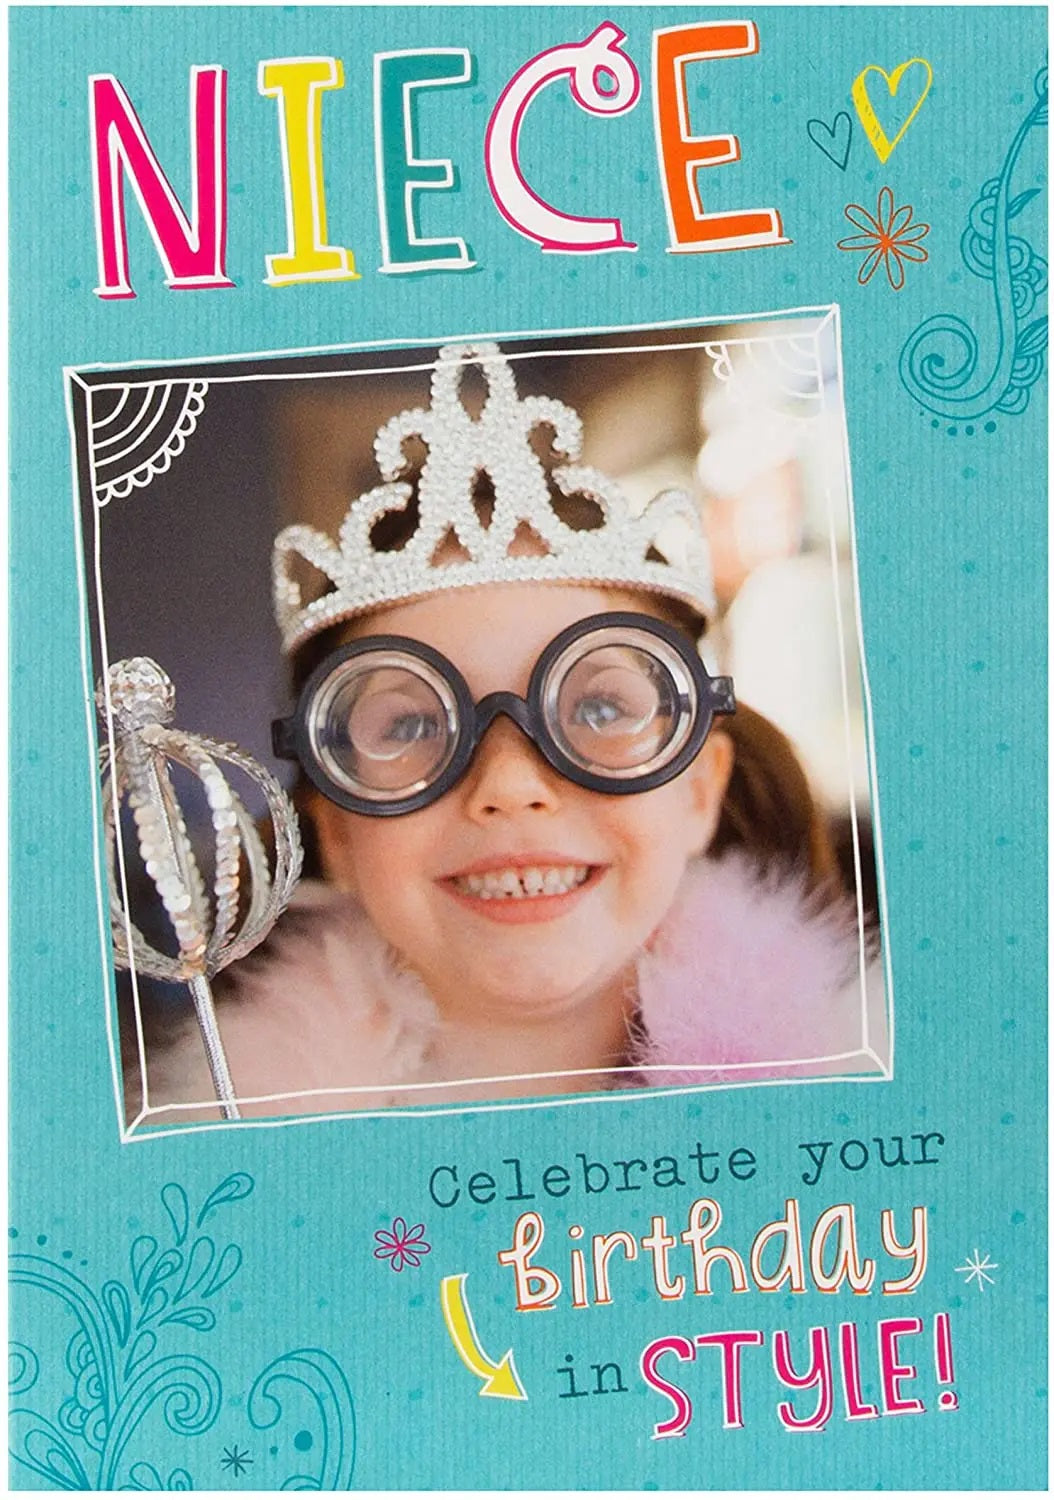 Niece Birthday Card - A Princess in the Making 